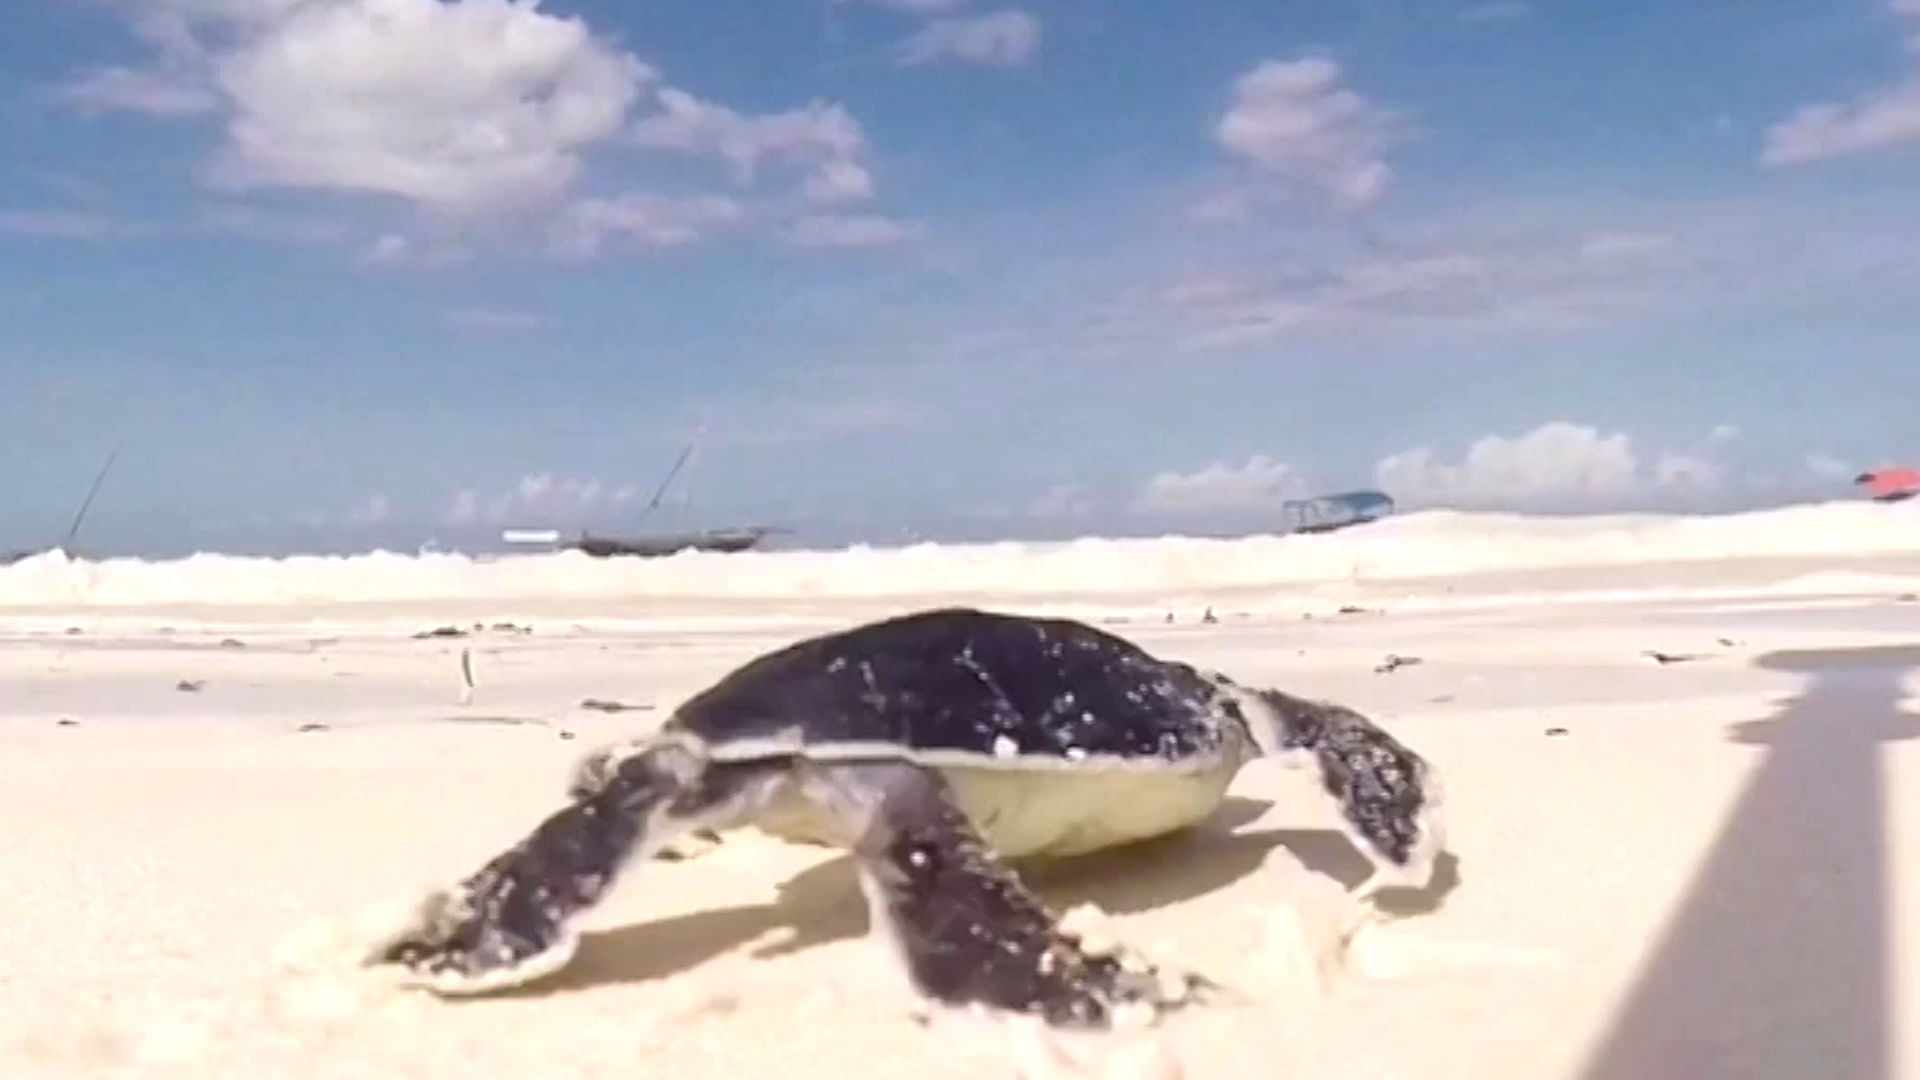 This newly born turtle leaves the sandy nest on the beach and heads for a swim into the ocean. (Photo: AP screengrab)